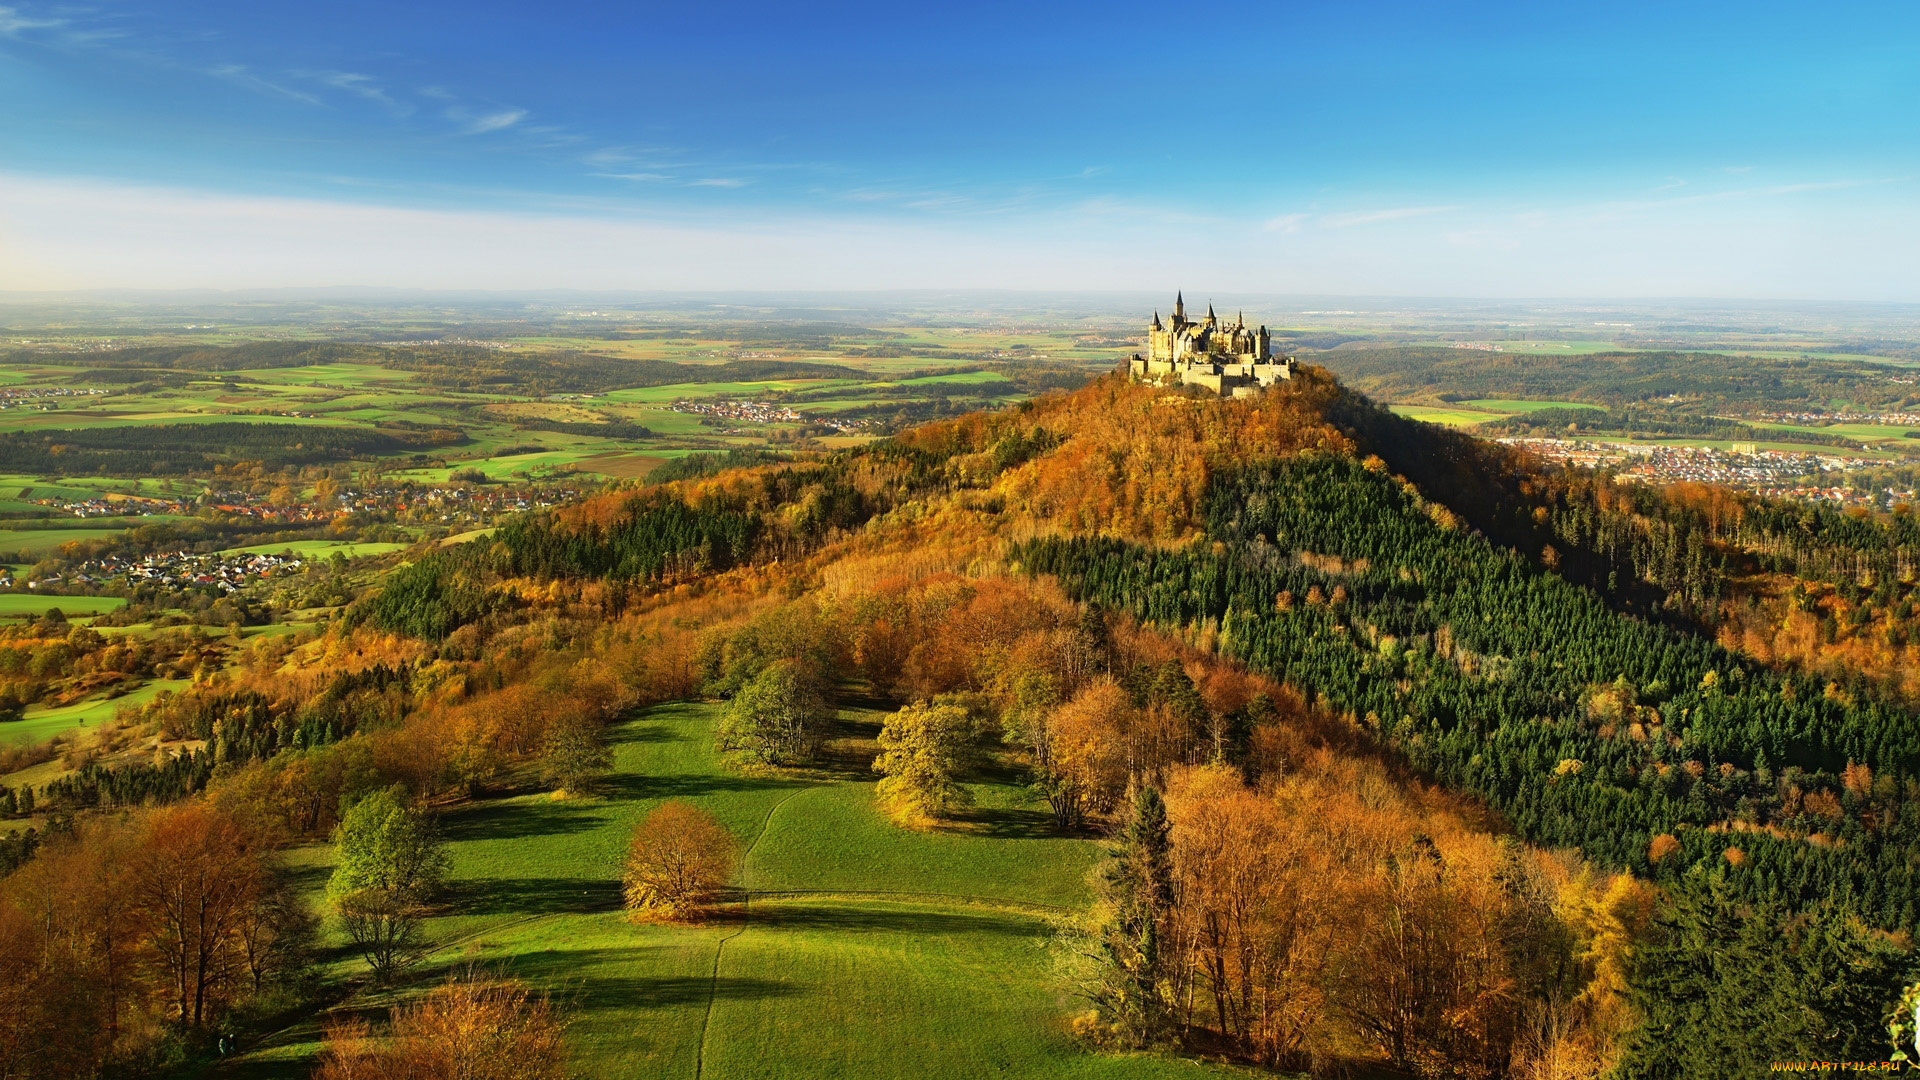 hohenzollern, castle, germany, города, замки, германии, hohenzollern, castle